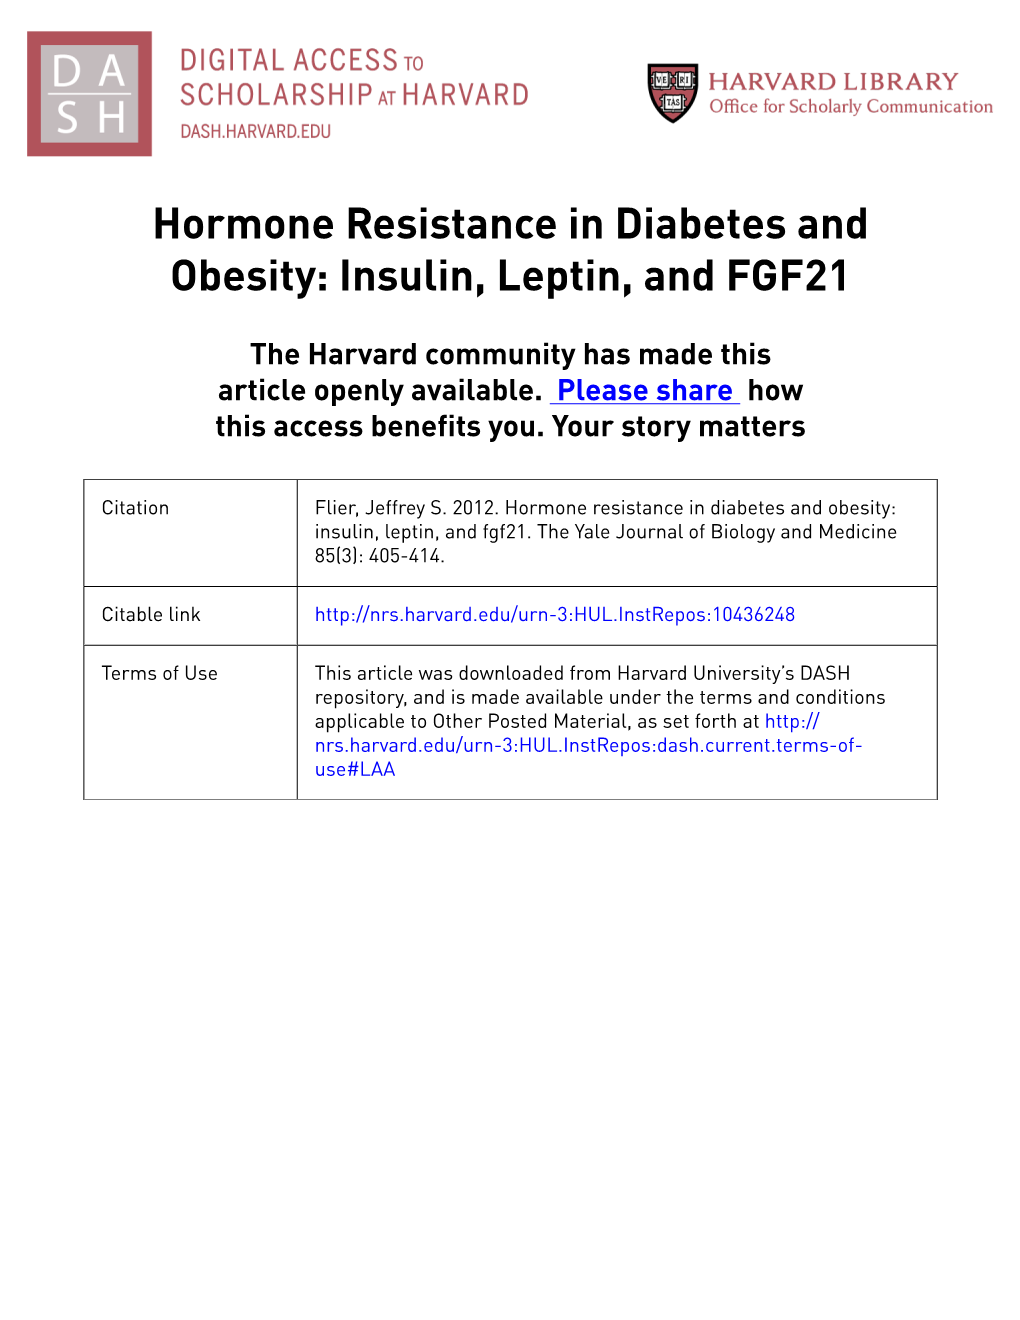 Hormone Resistance in Diabetes and Obesity: Insulin, Leptin, and FGF21